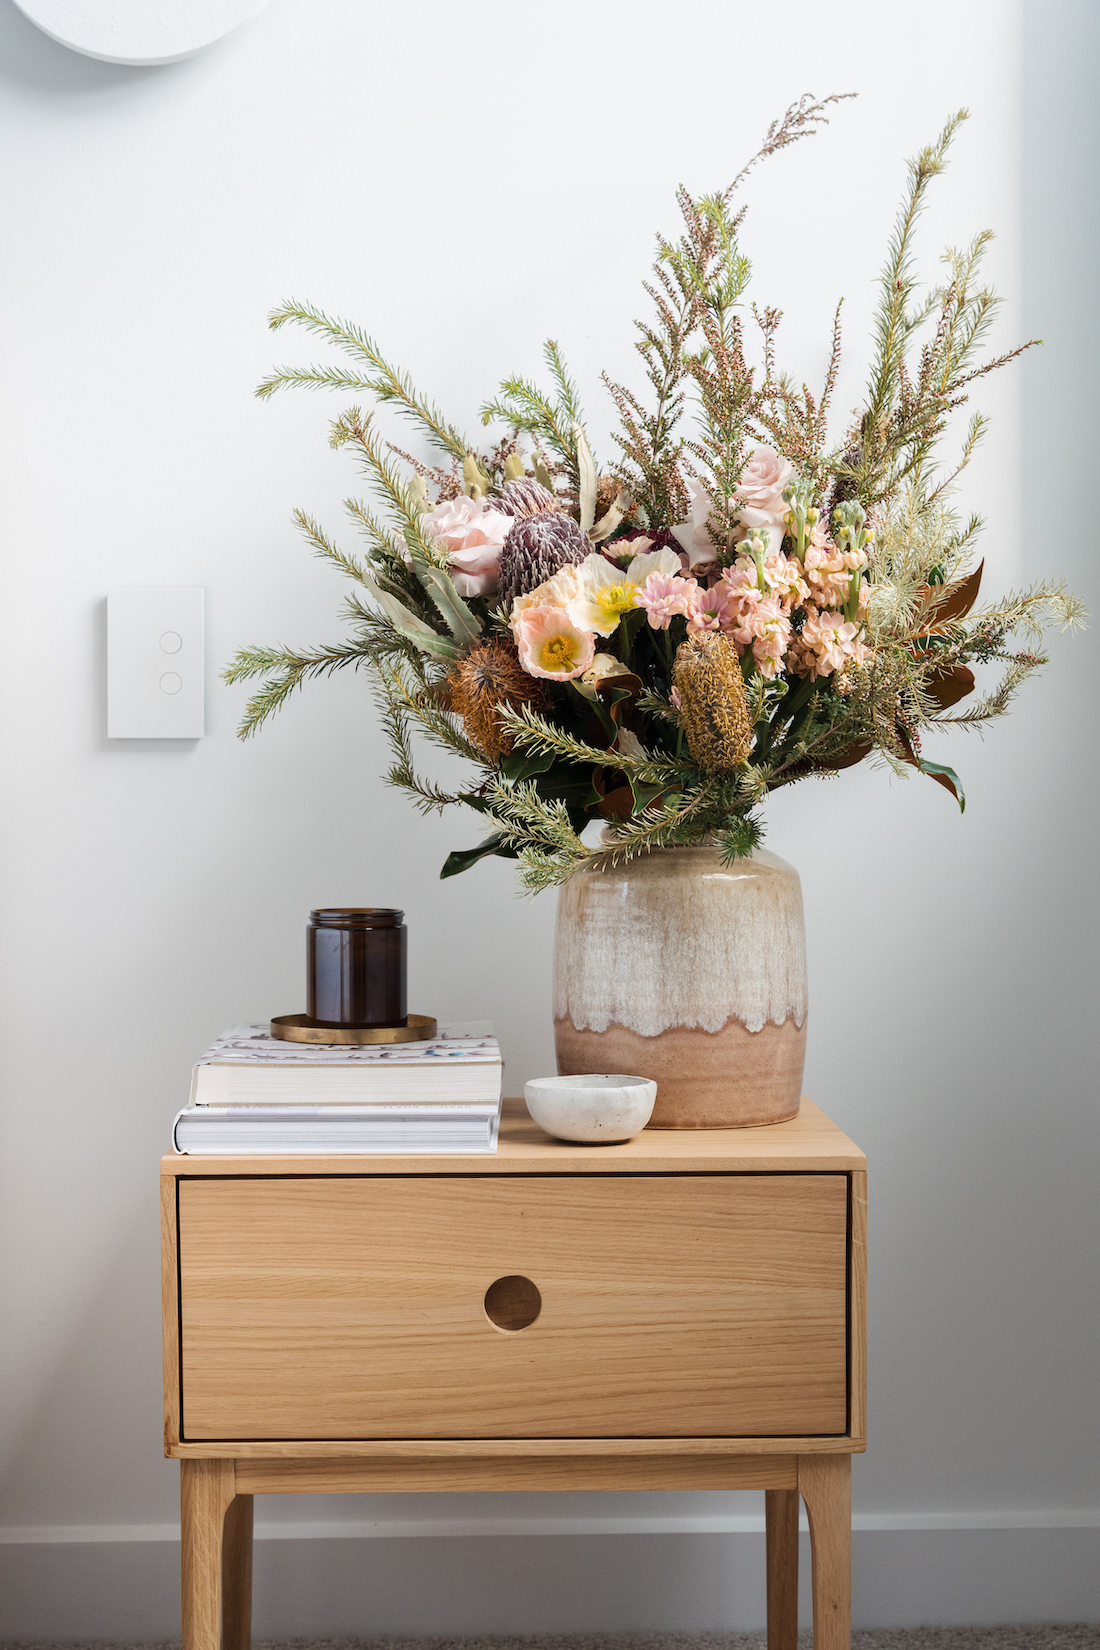 Bedside styling front on _ join the #stylecuratorchallenge